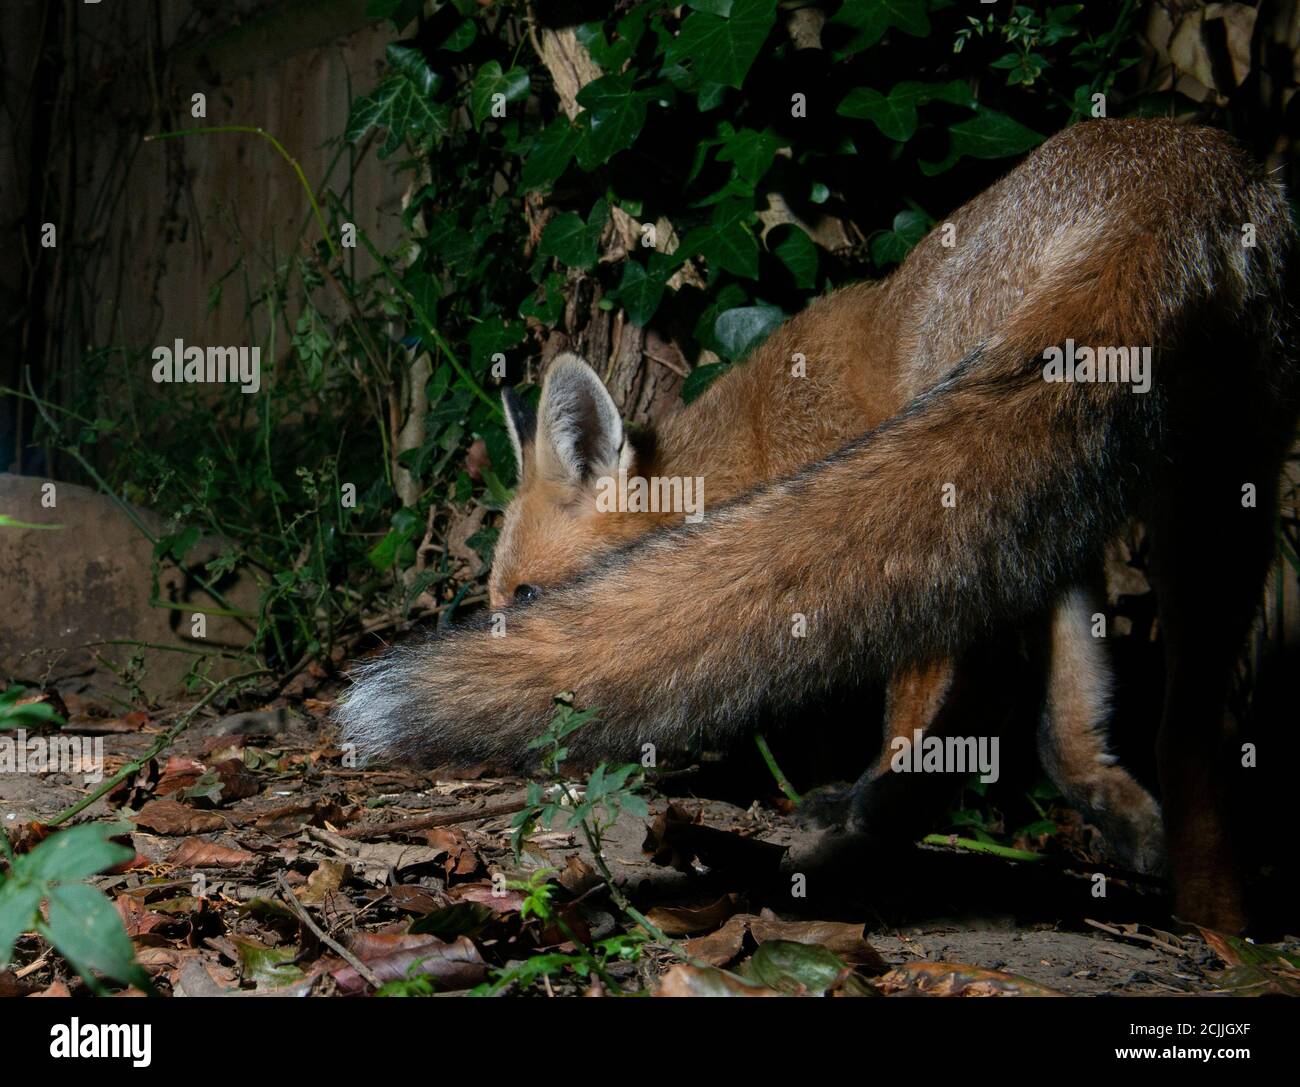 Fox at night body curled round behind tail Stock Photo